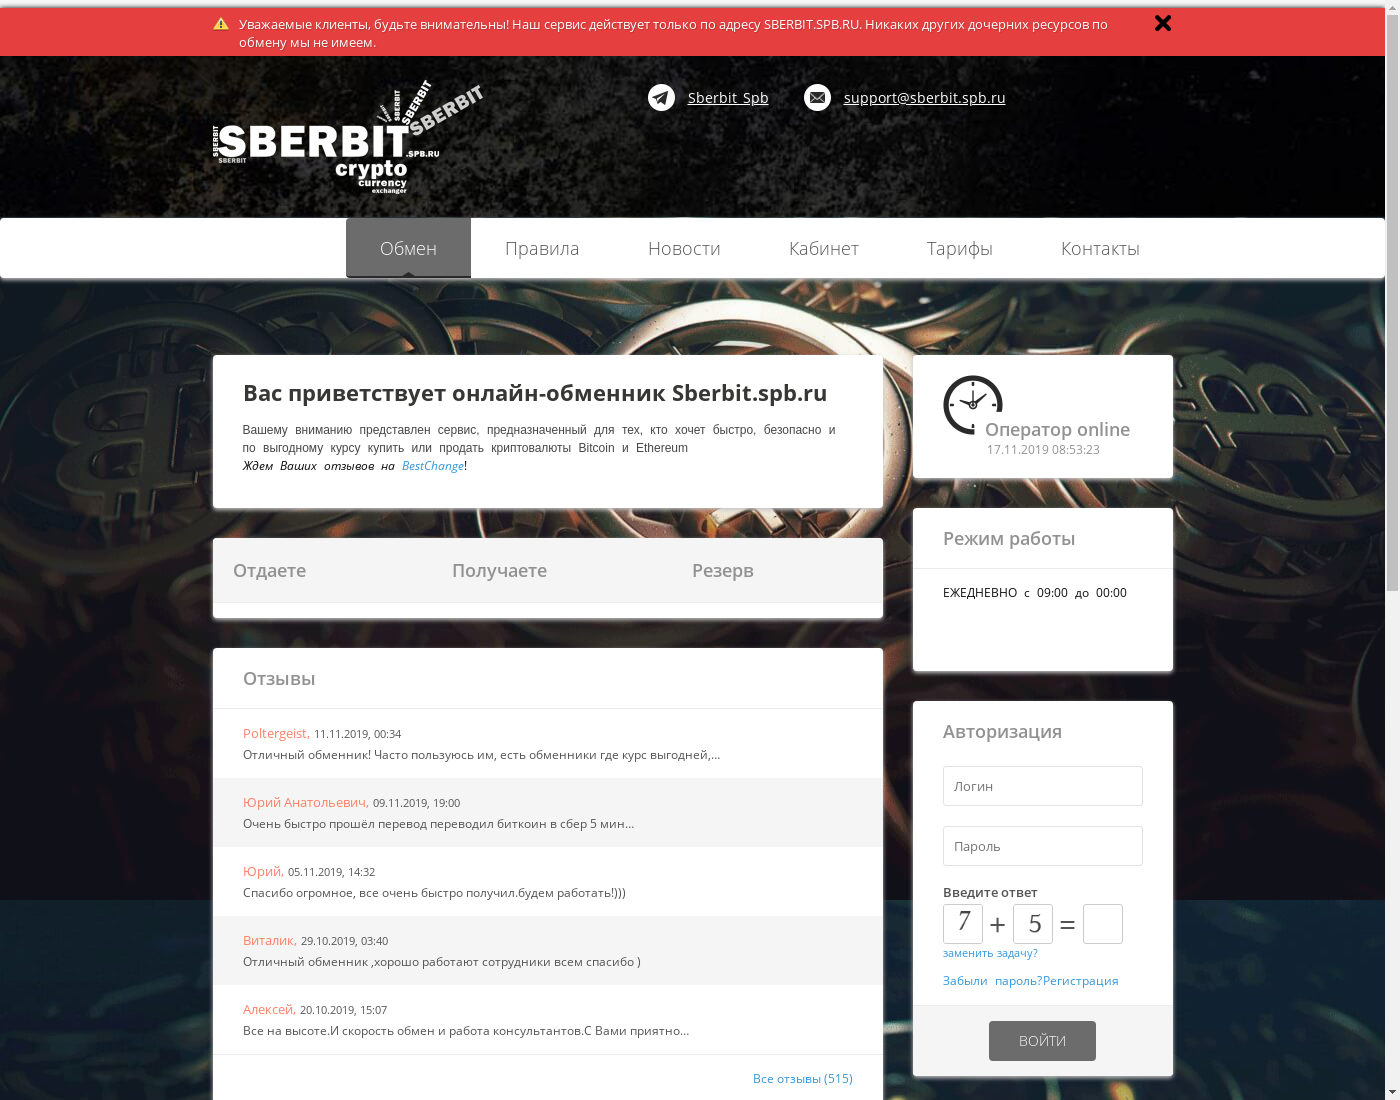 sberbit user interface: the home page in English